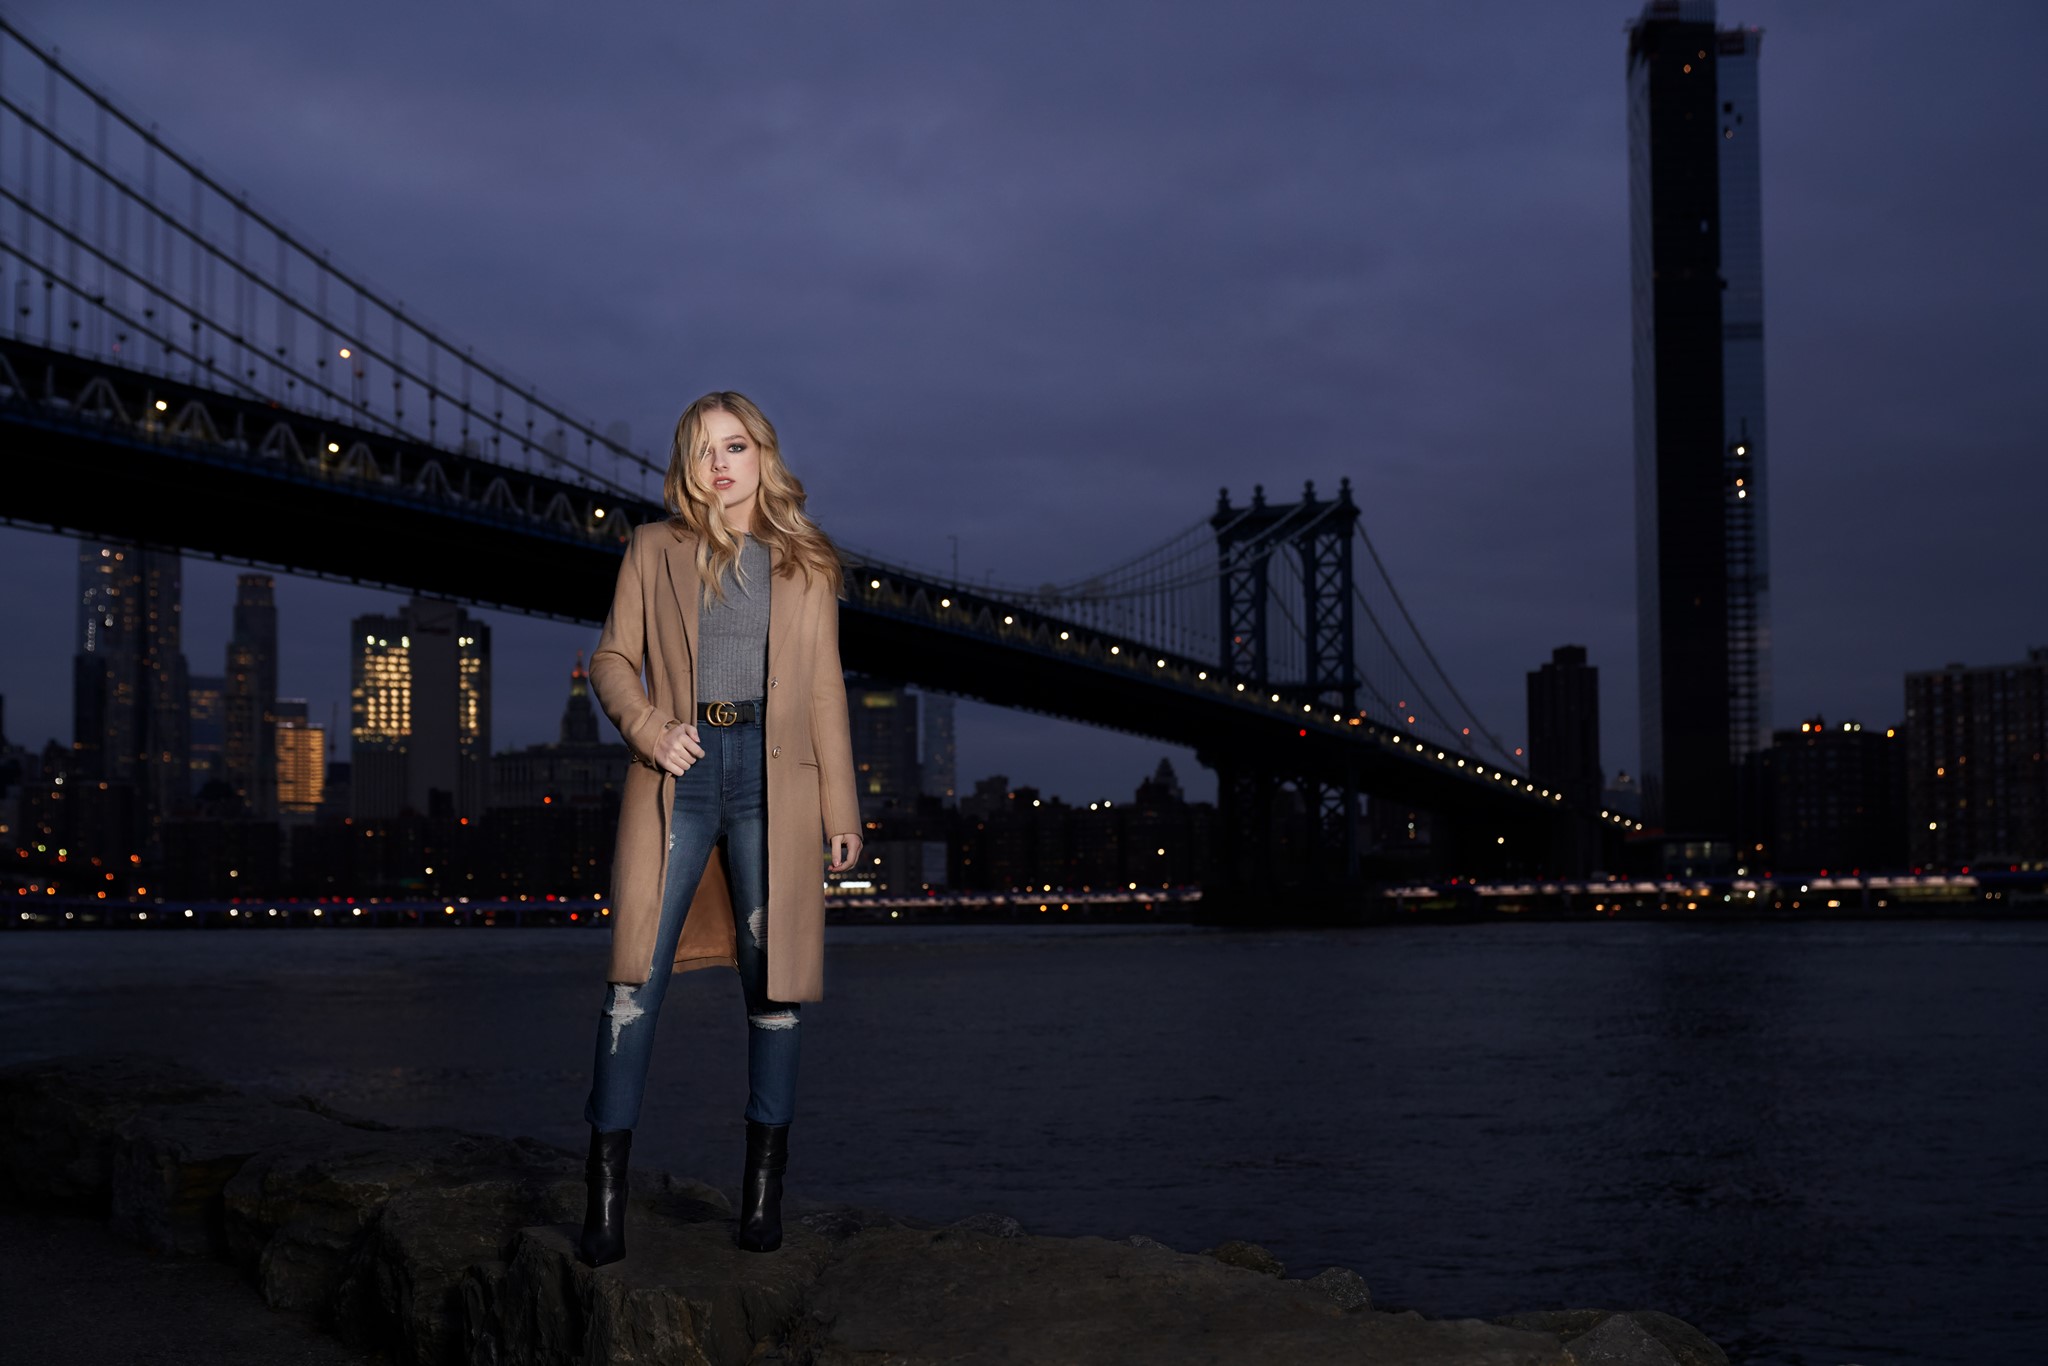 Jackie Evancho Remakes Joni Mitchell Classic, “River”